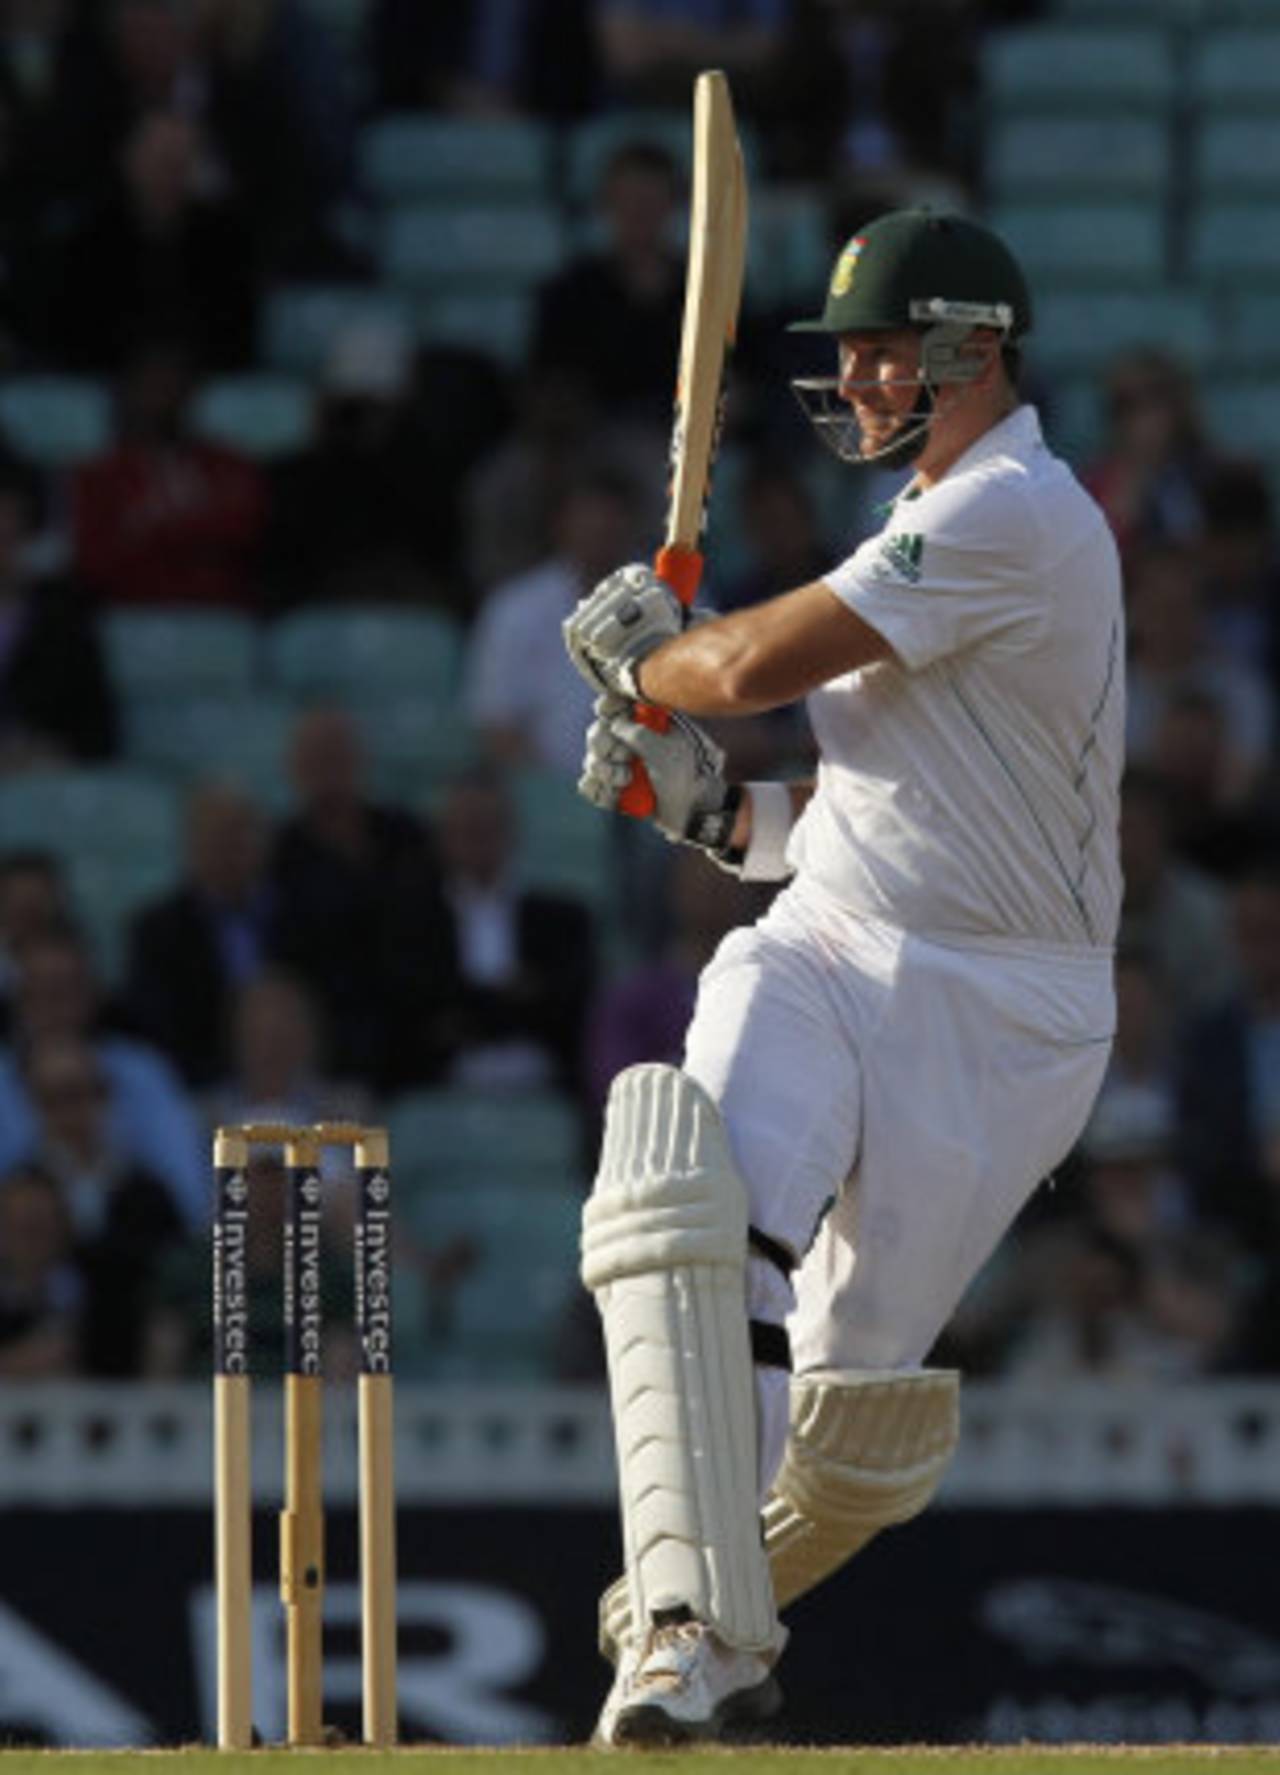 Graeme Smith battled his way to 37 runs in 37 overs in a display of patient accumulation&nbsp;&nbsp;&bull;&nbsp;&nbsp;Getty Images